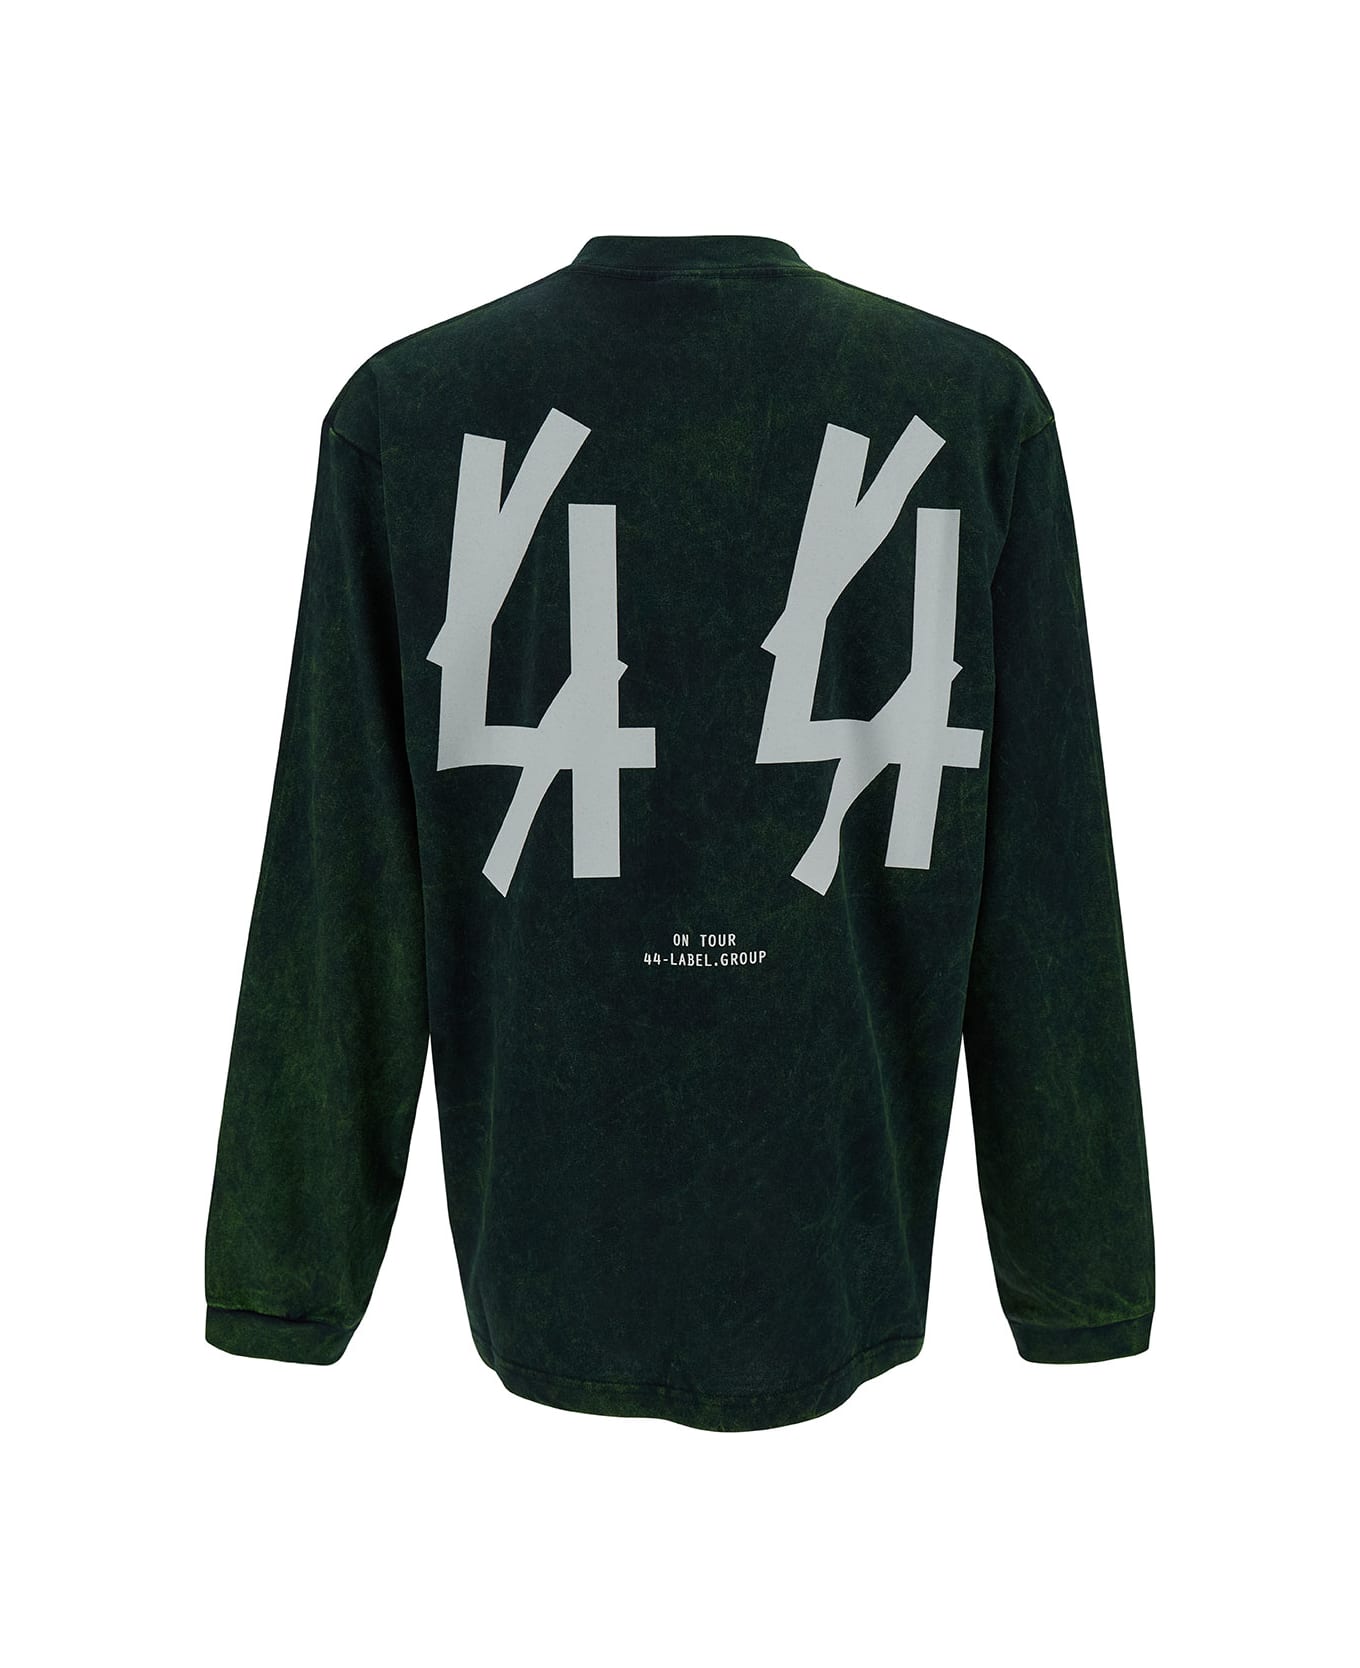 44 Label Group 'solar' Green Long Sleeve T-shirt With Contrasting Logo Print In Cotton Man - Green